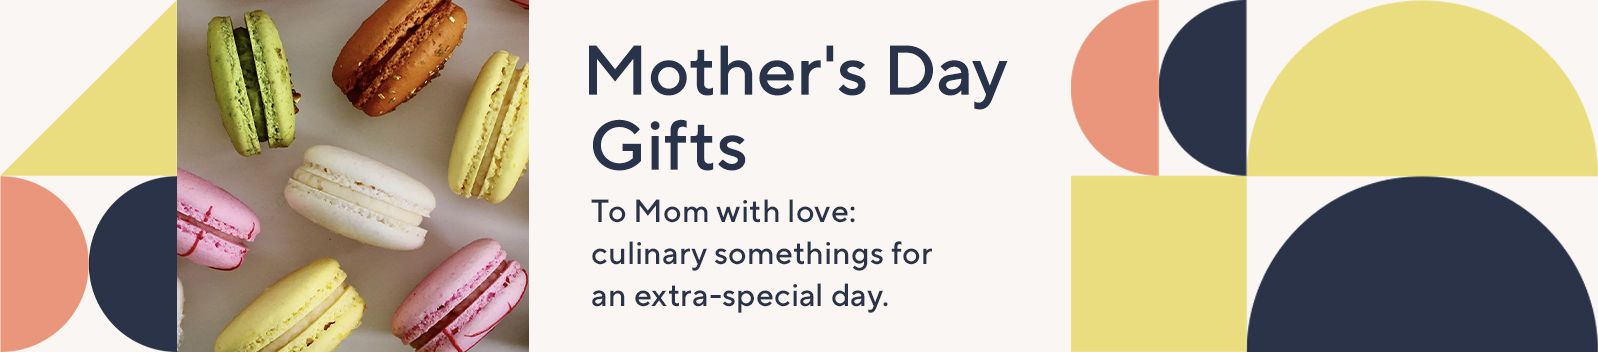 Mother's Day Gifts:  To Mom with love: culinary somethings for an extra-special day. 